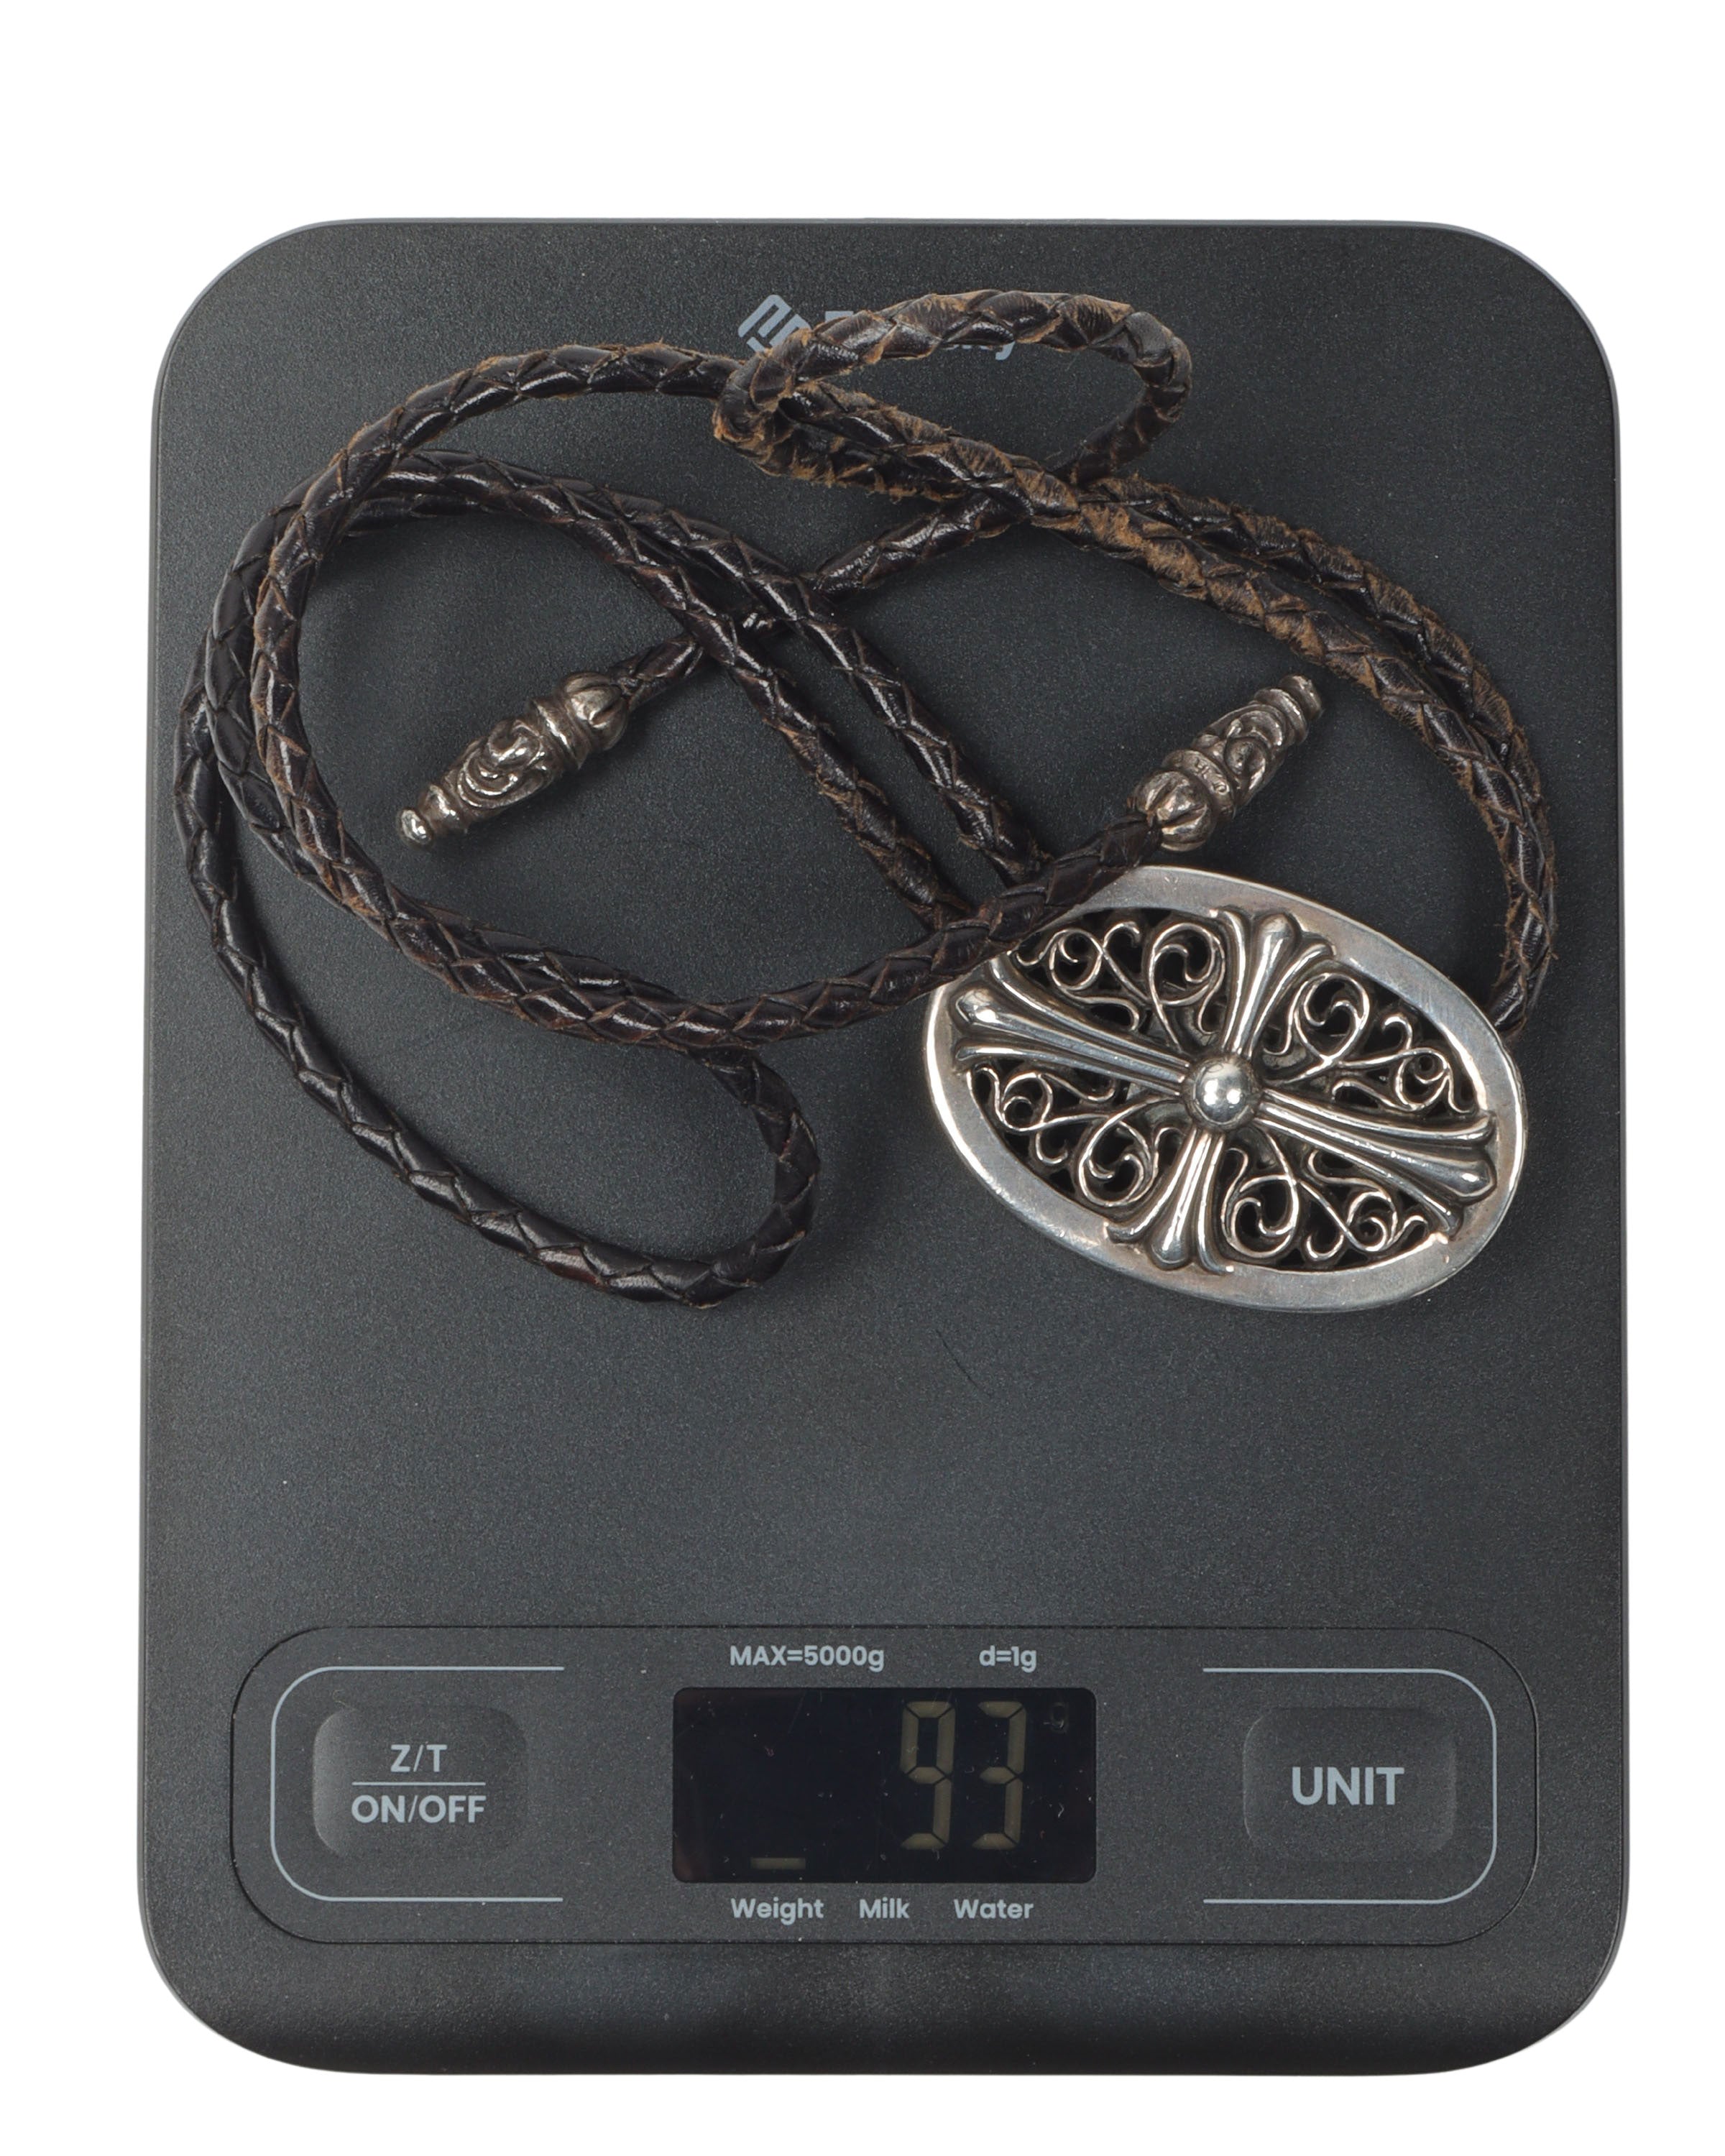 Oval Cross Braided Leather Bolo Tie